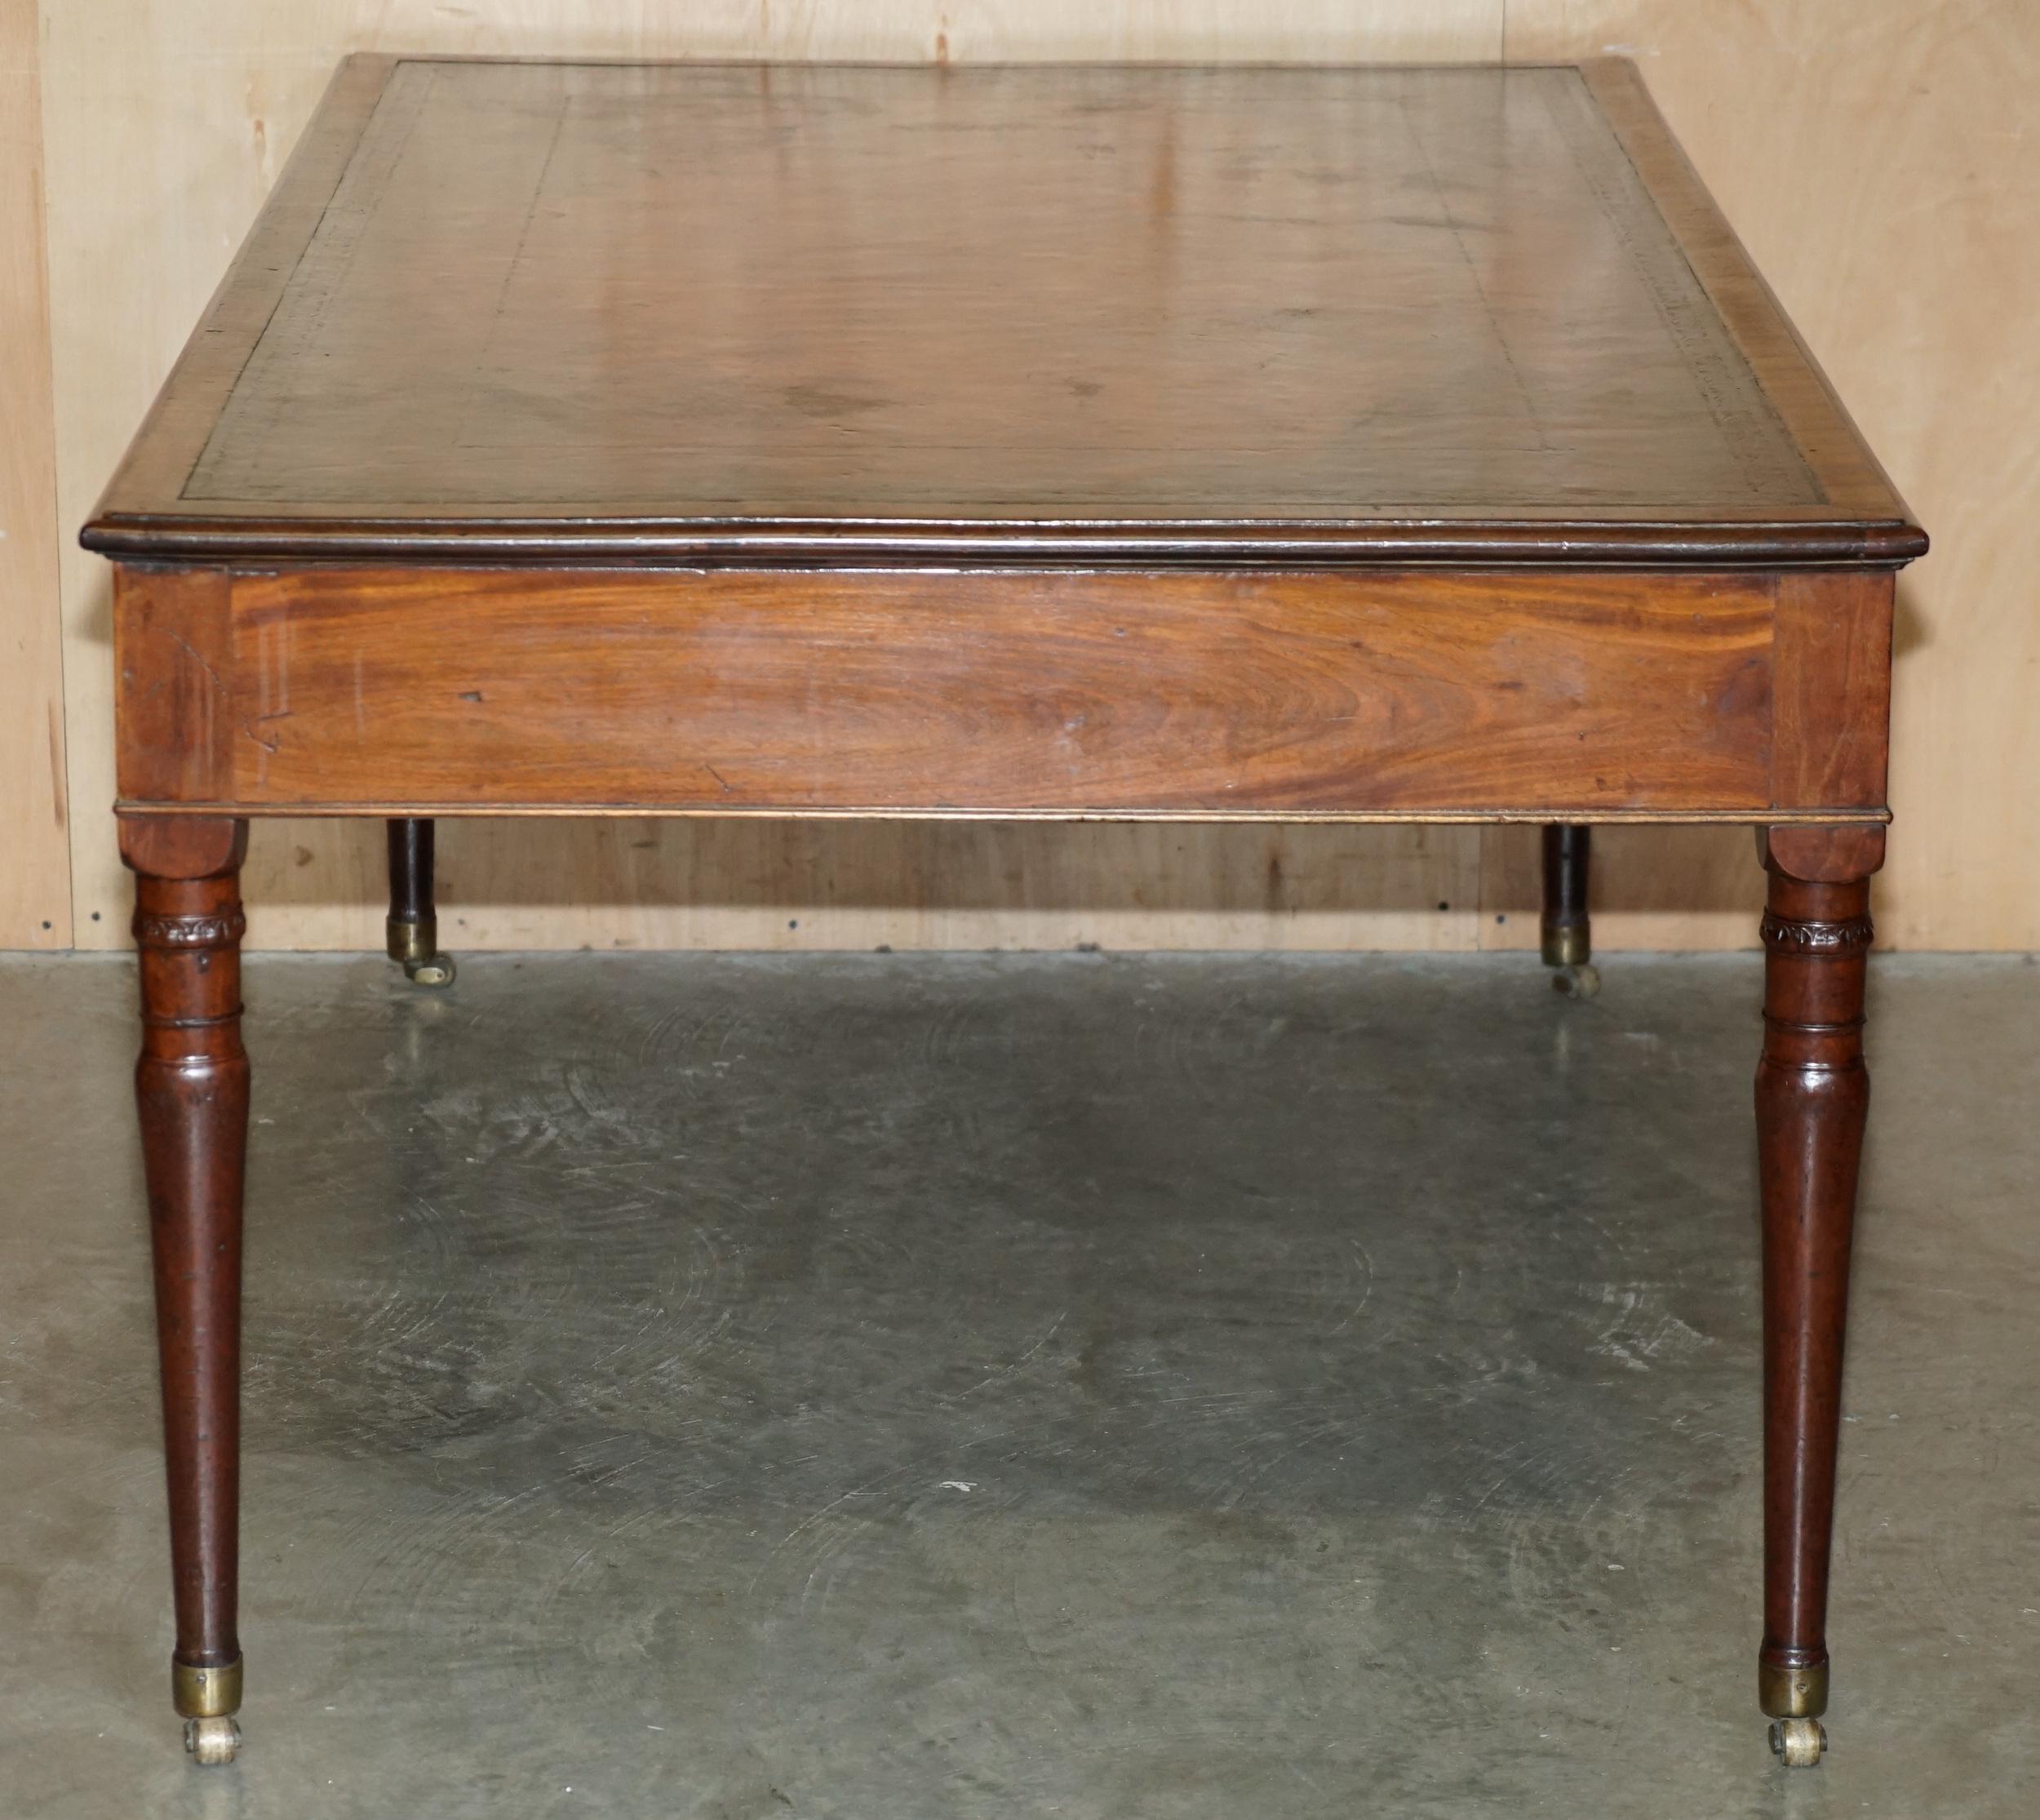 EXQUISITE ANTiQUE GEORGIAN IRISH 1780 RESTORED BROWN LEATHER WRITING TABLE DESK For Sale 11